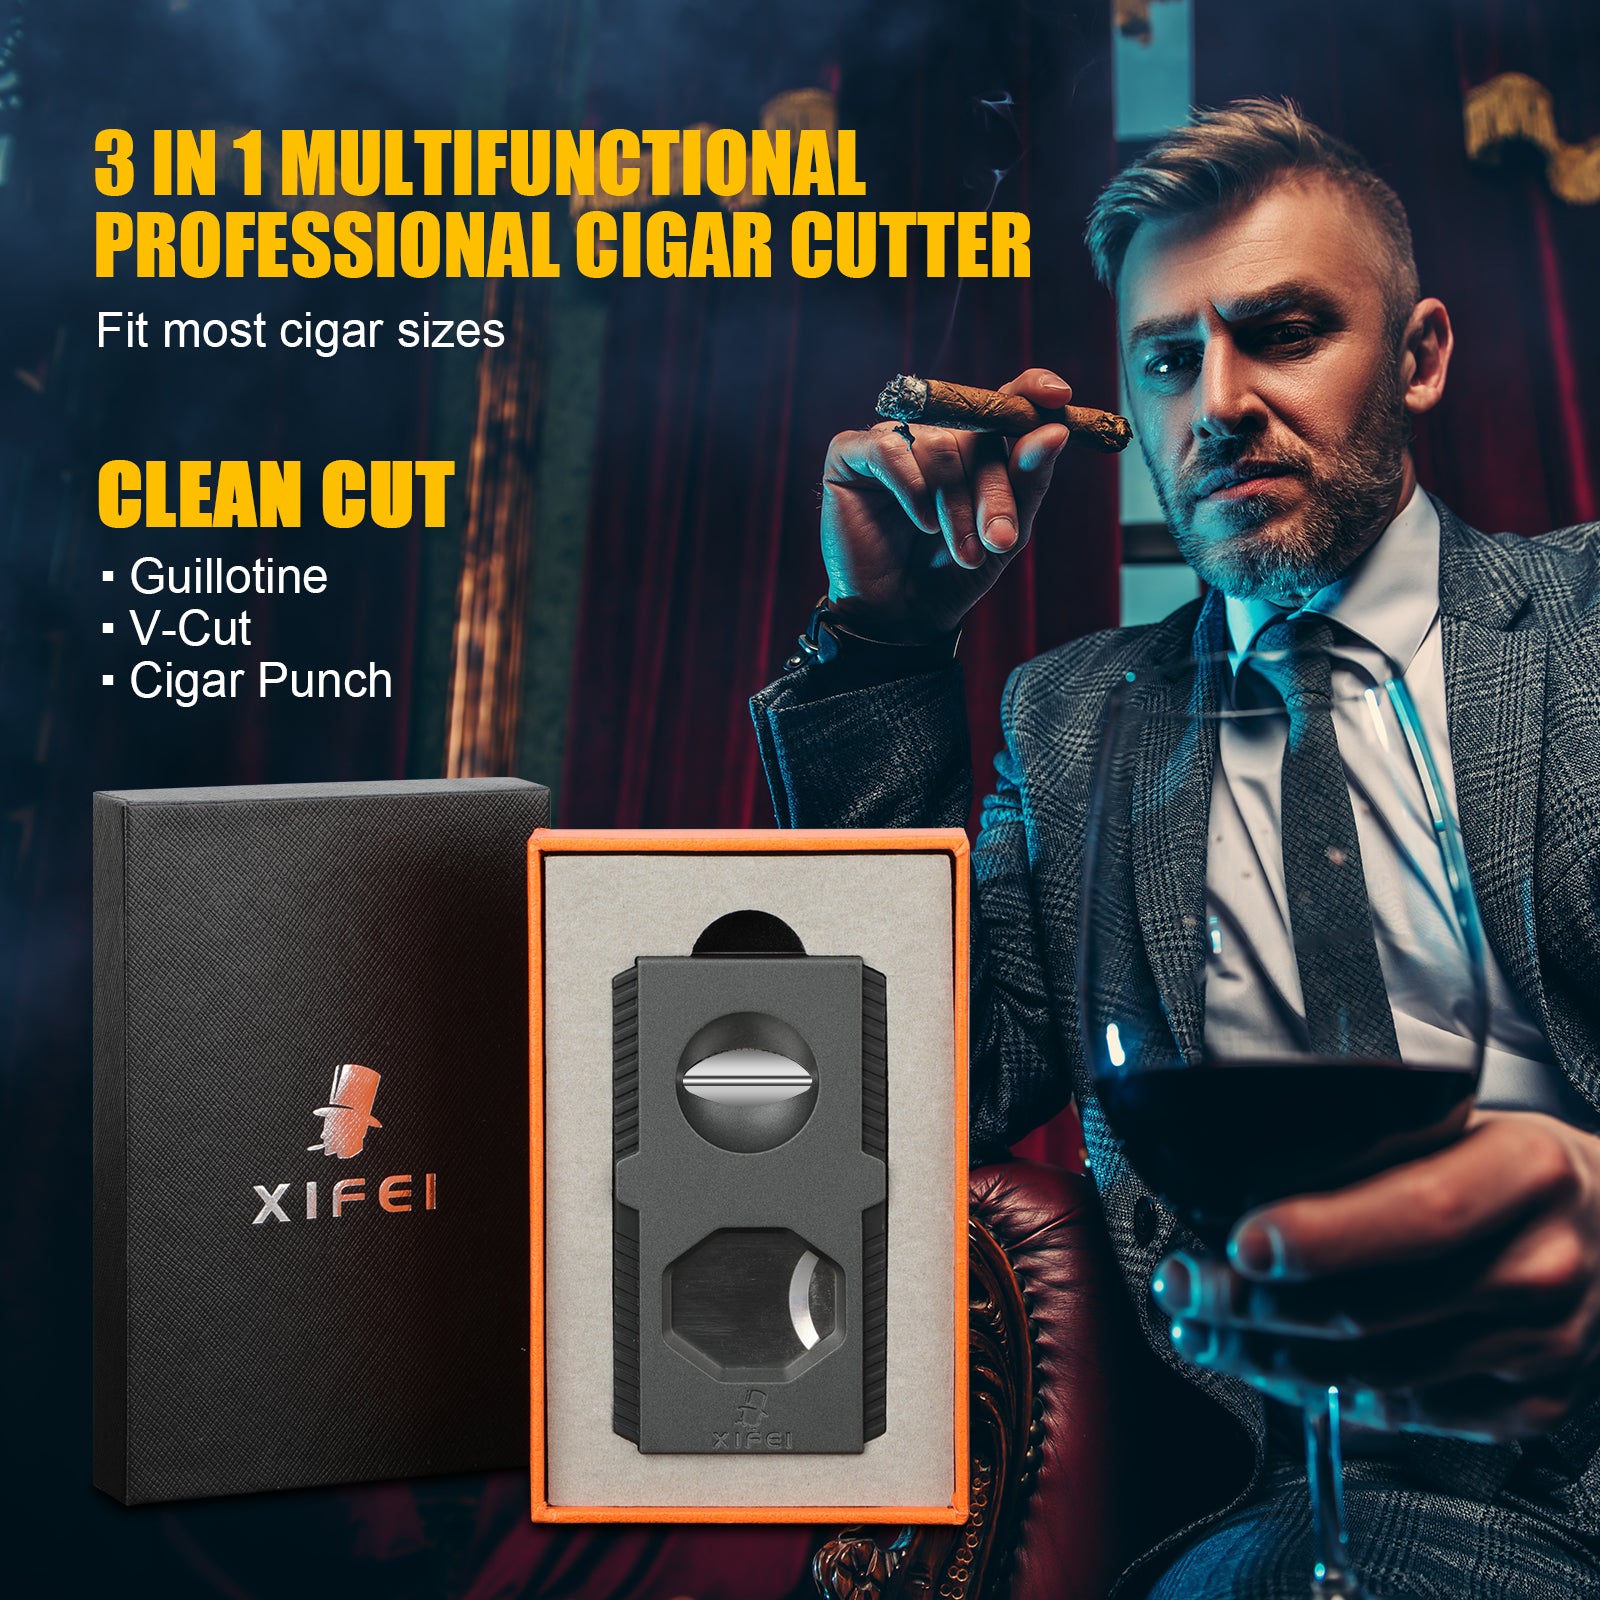  XIFEI Cigar Cutter V-Cut Guillotine,4 in 1 Straight Cut V  Cutter with Cigar Punch Cigar Holder Stainless Steel Blade Ergonomic Design  with Secure-Lock 60 RG Cigar Accessories (Black) : Health 